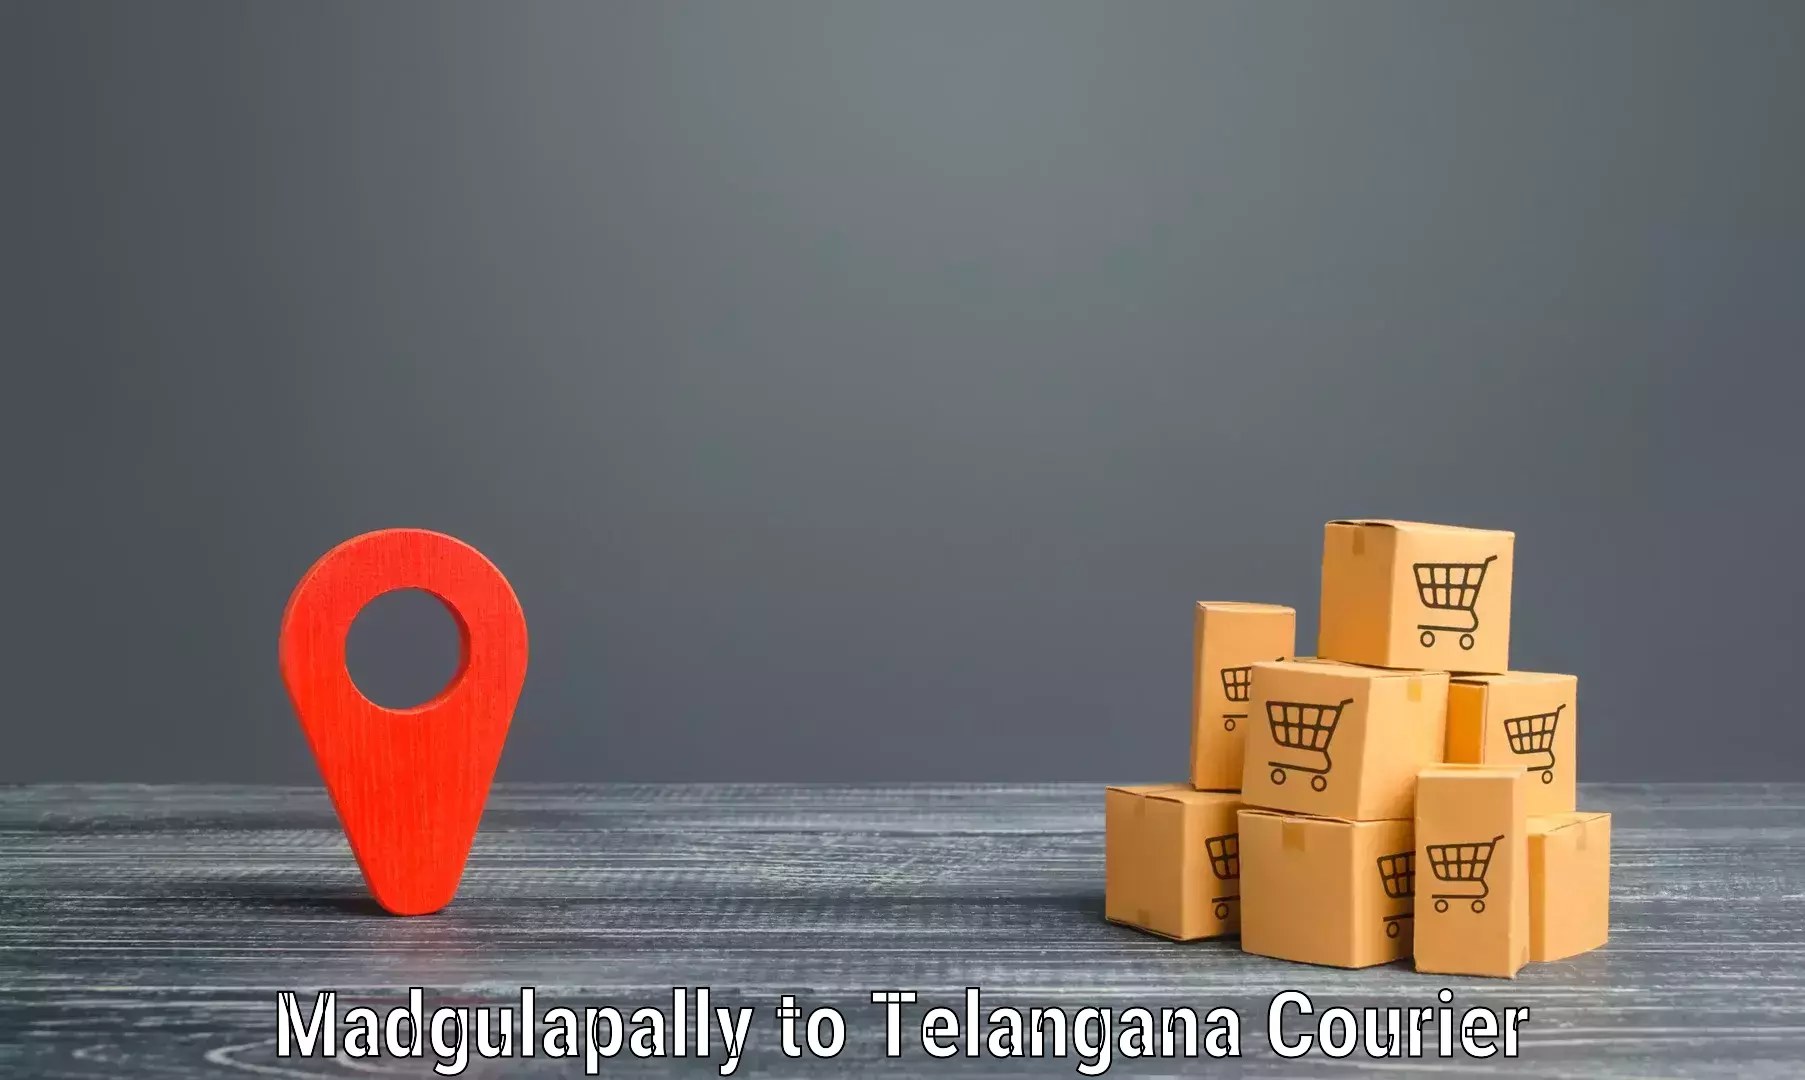 Flexible delivery scheduling Madgulapally to Chennur